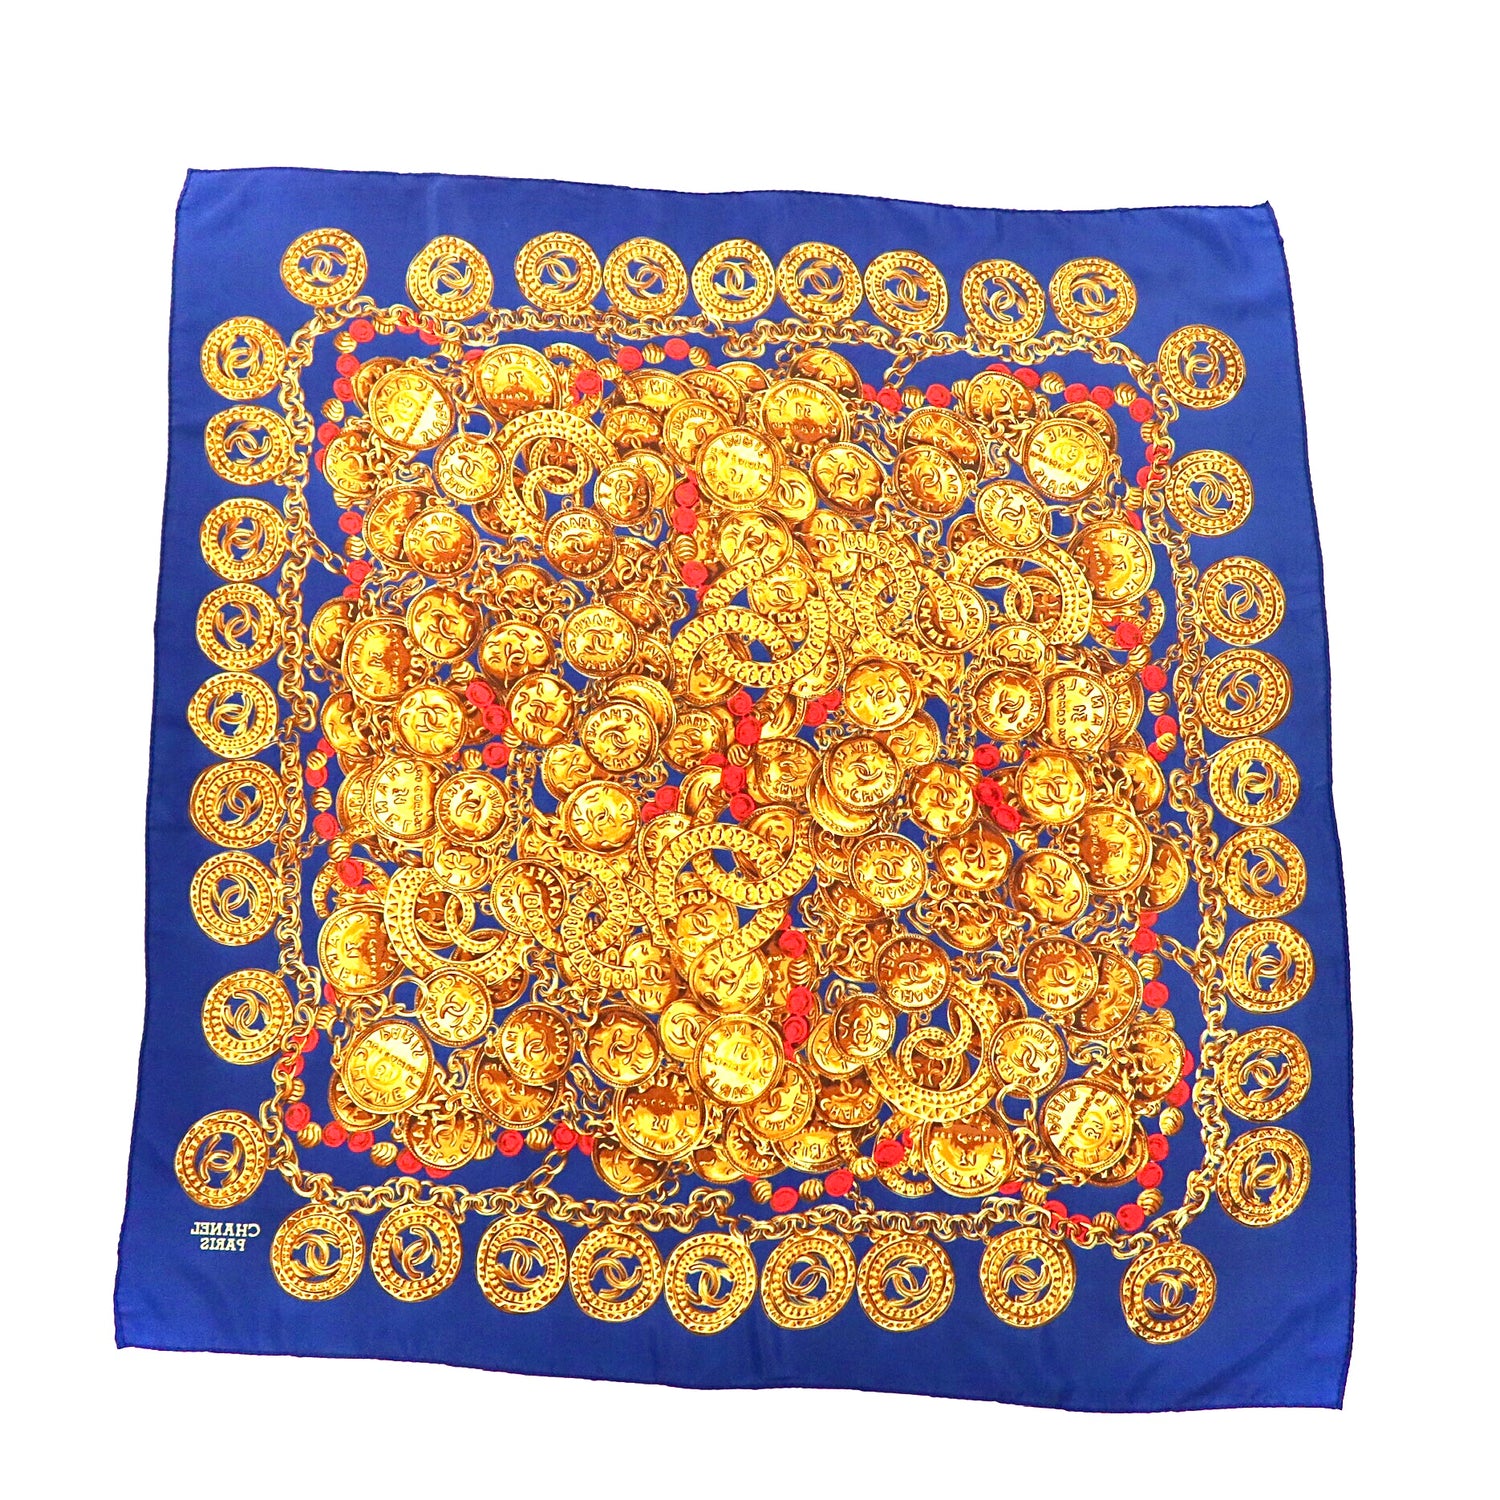 △ CHANEL Scarf Navy Gold Silk Patterned Coco Mark Chain Jewelry